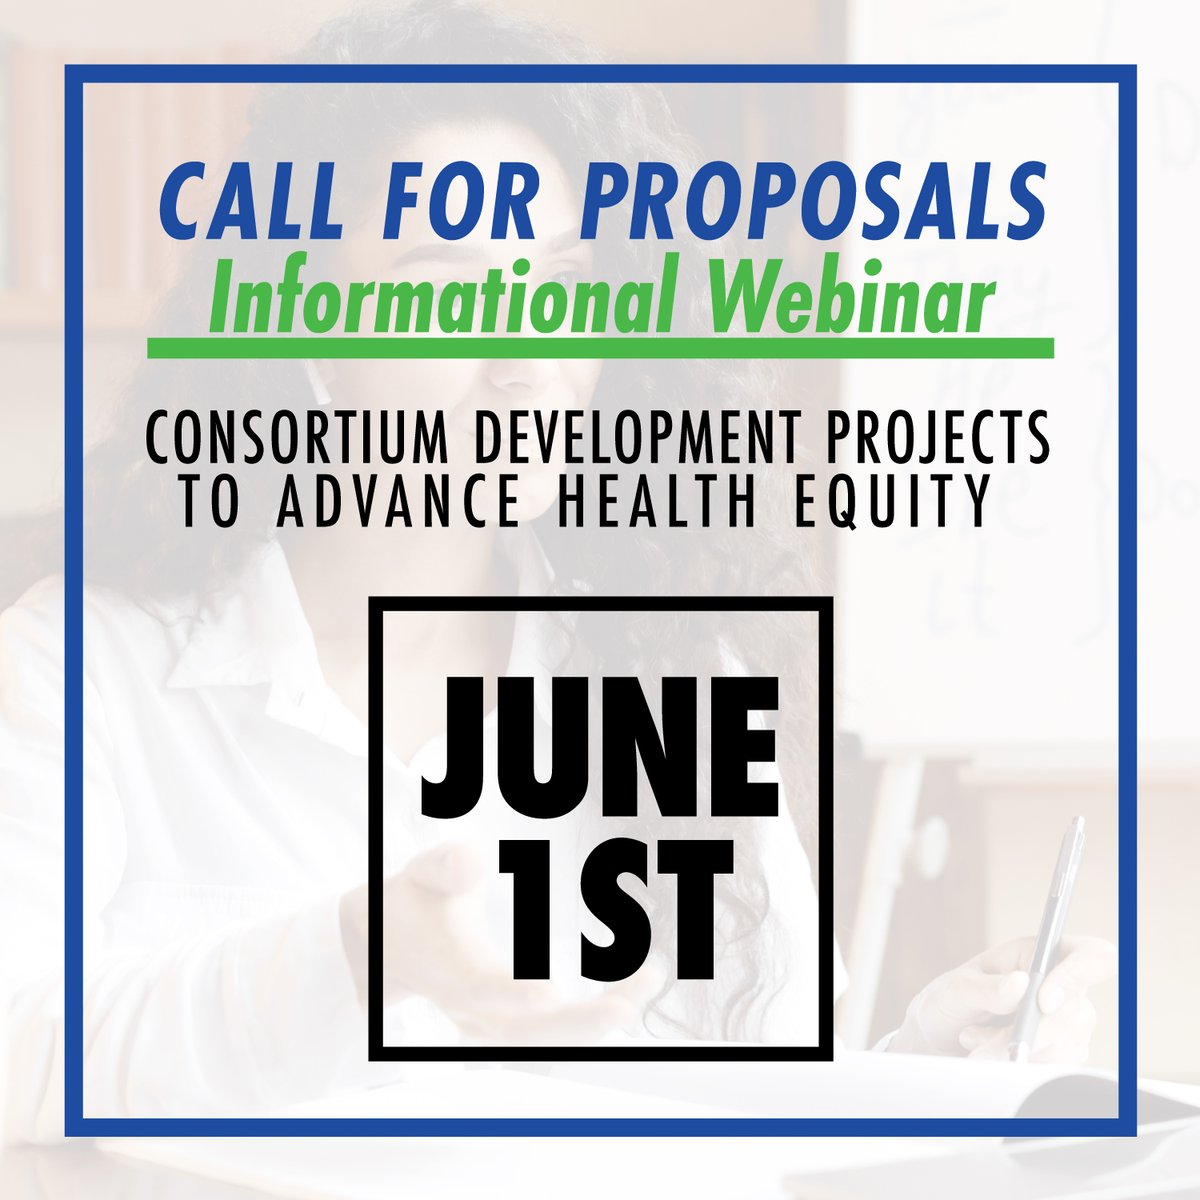 Interested in #FundingOpportunities for research using #AI / #ML to improve #HealthEquity?
Register for our free webinar on June 1 at 2 p.m. CST to learn more!
bit.ly/3OzJ3MY
#HealthDisparities